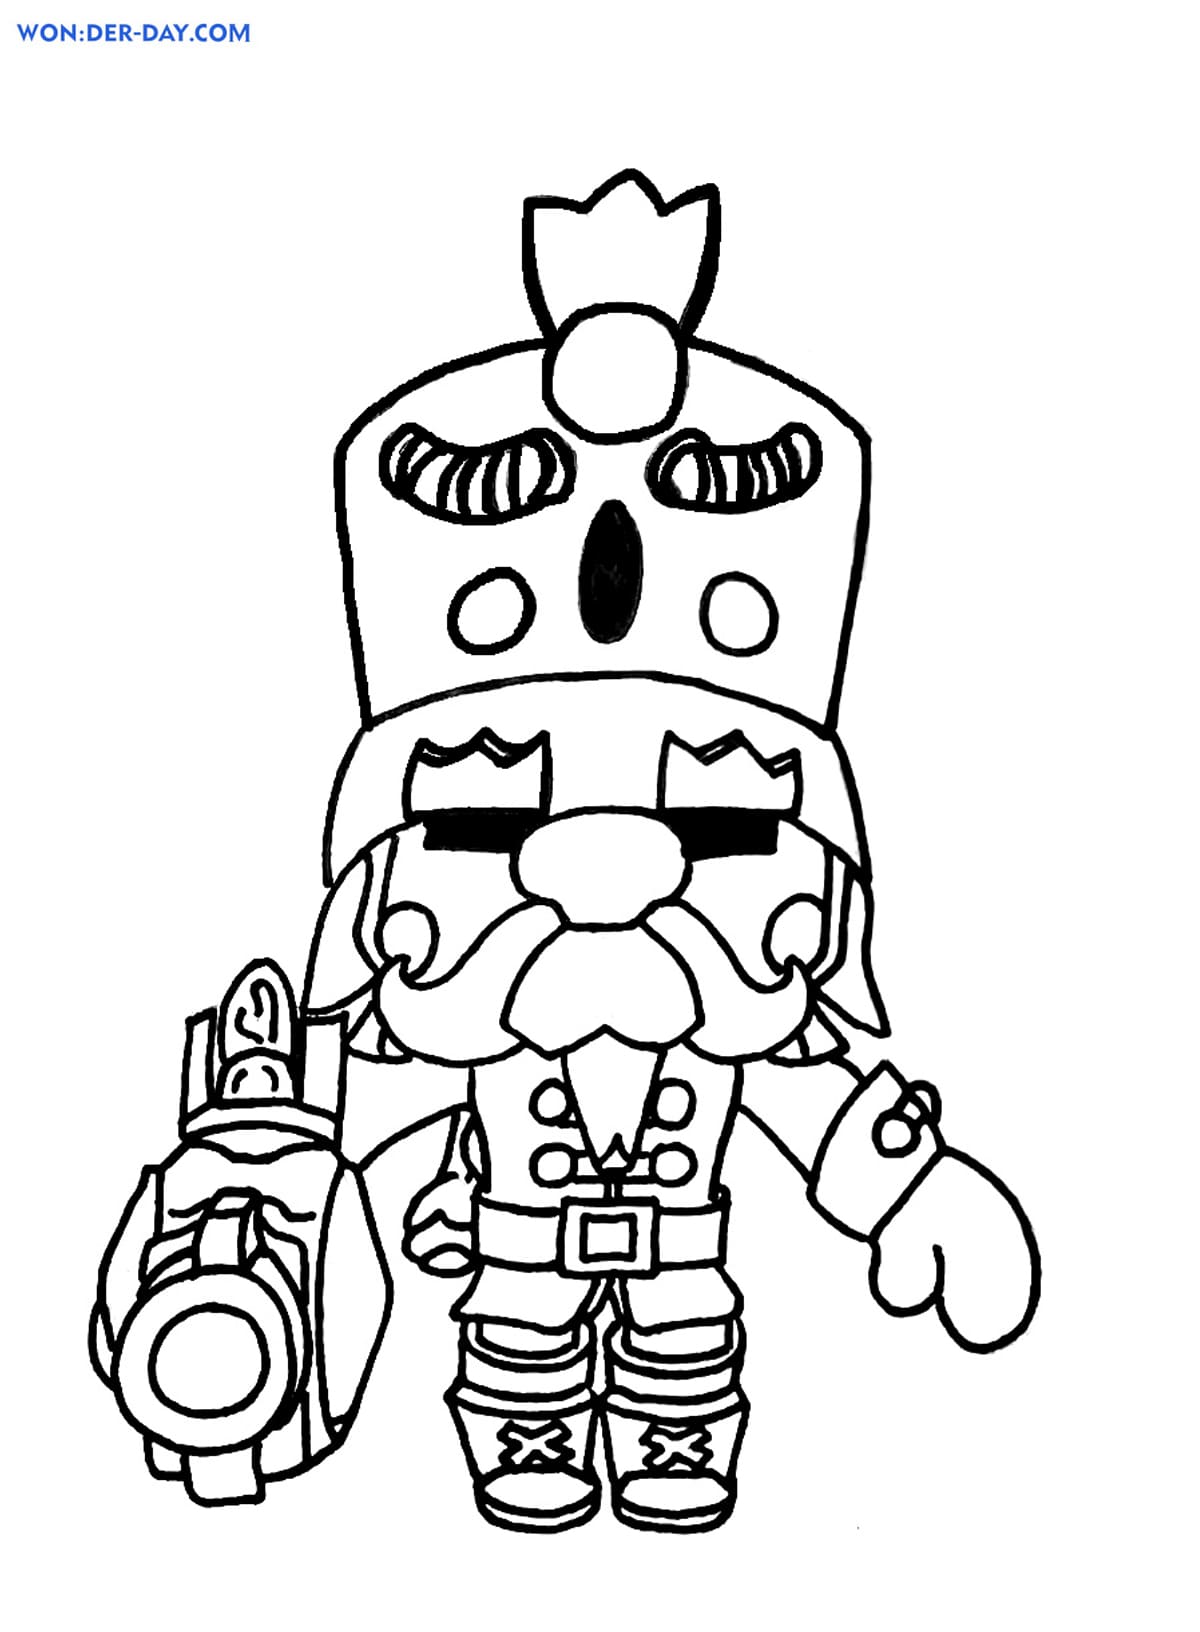 Nutcracker Coloring Pages Print For Free Wonder Day Coloring Pages For Children And Adults - dessin brawl stars gael